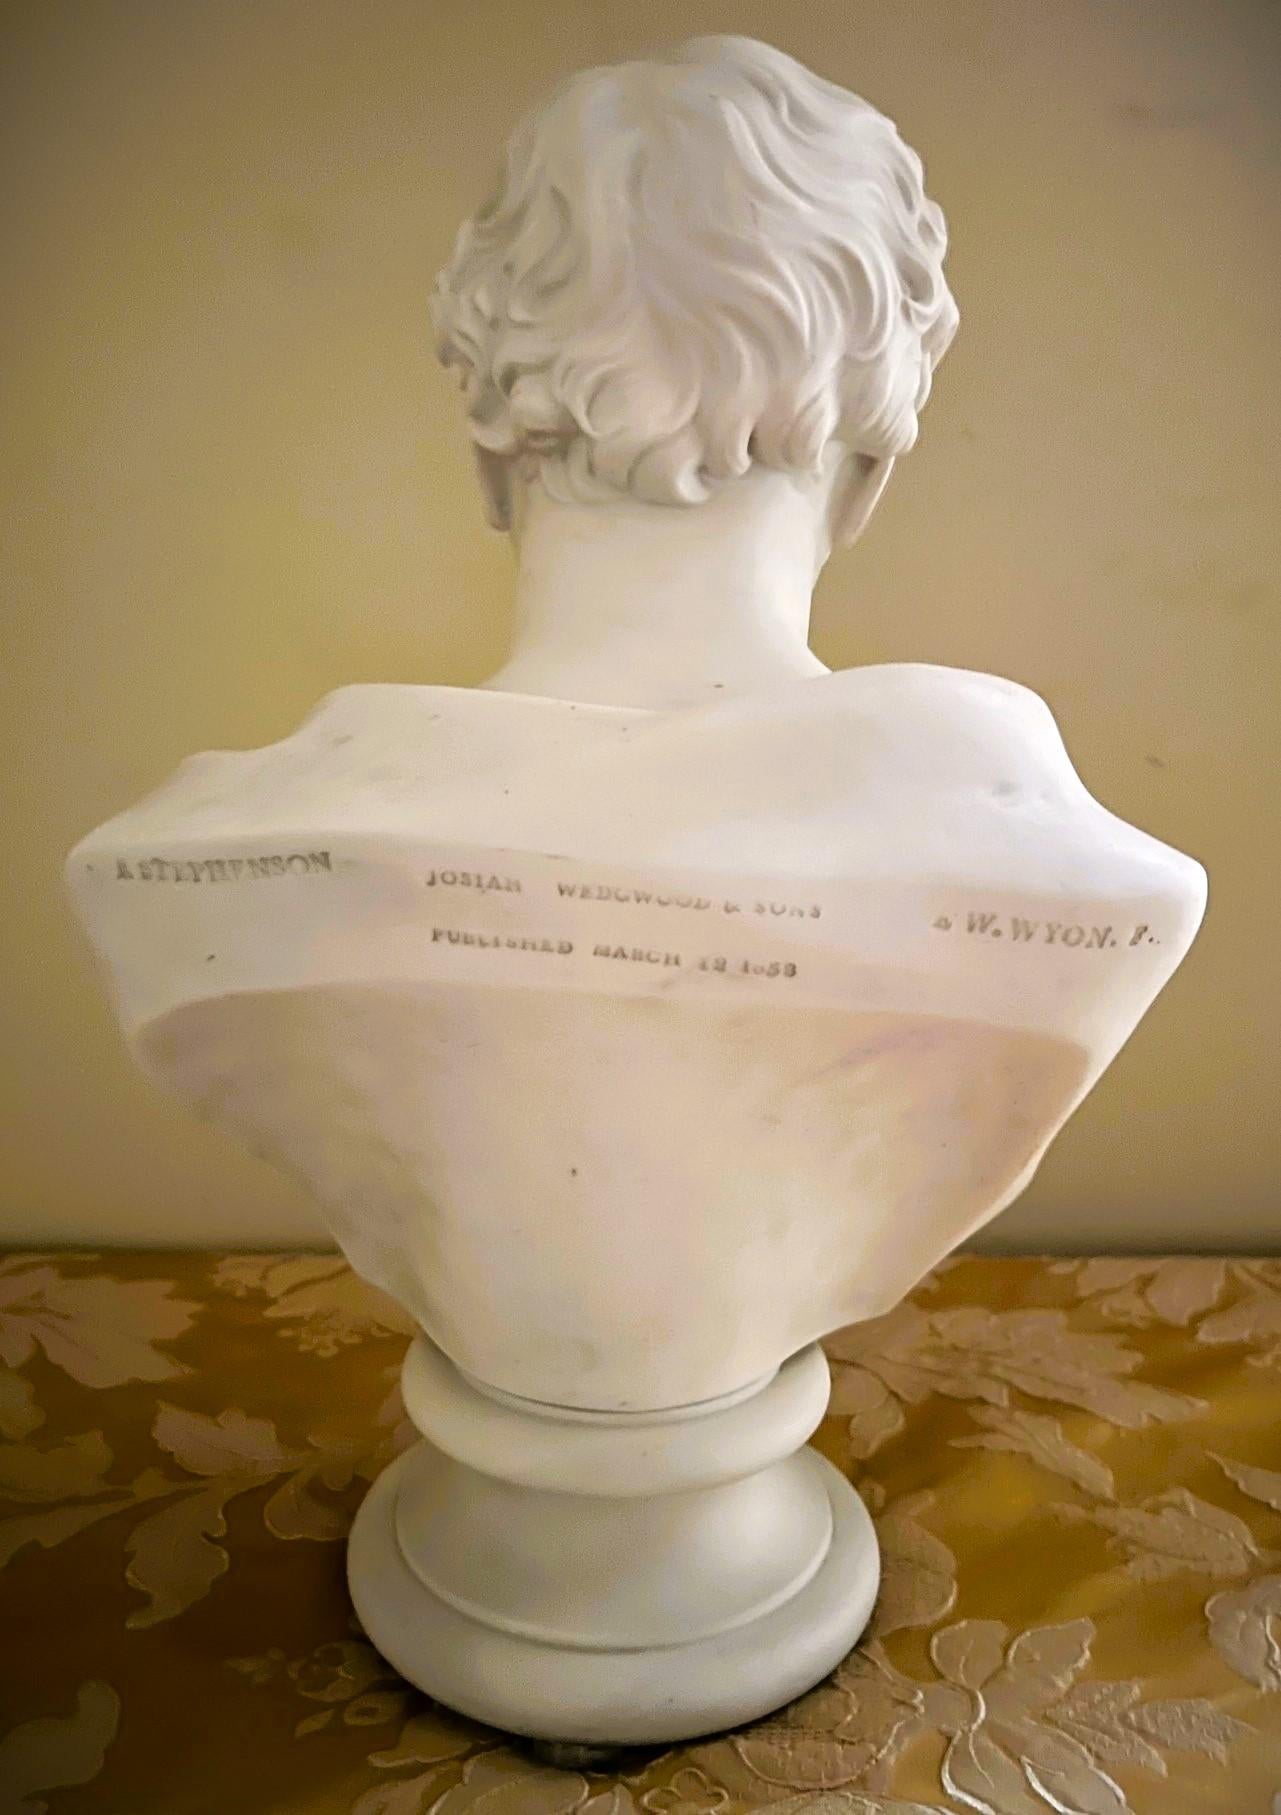 19th Century Wedgwood Parian Bust of Robert Stephenson by E. W. Wyon For Sale